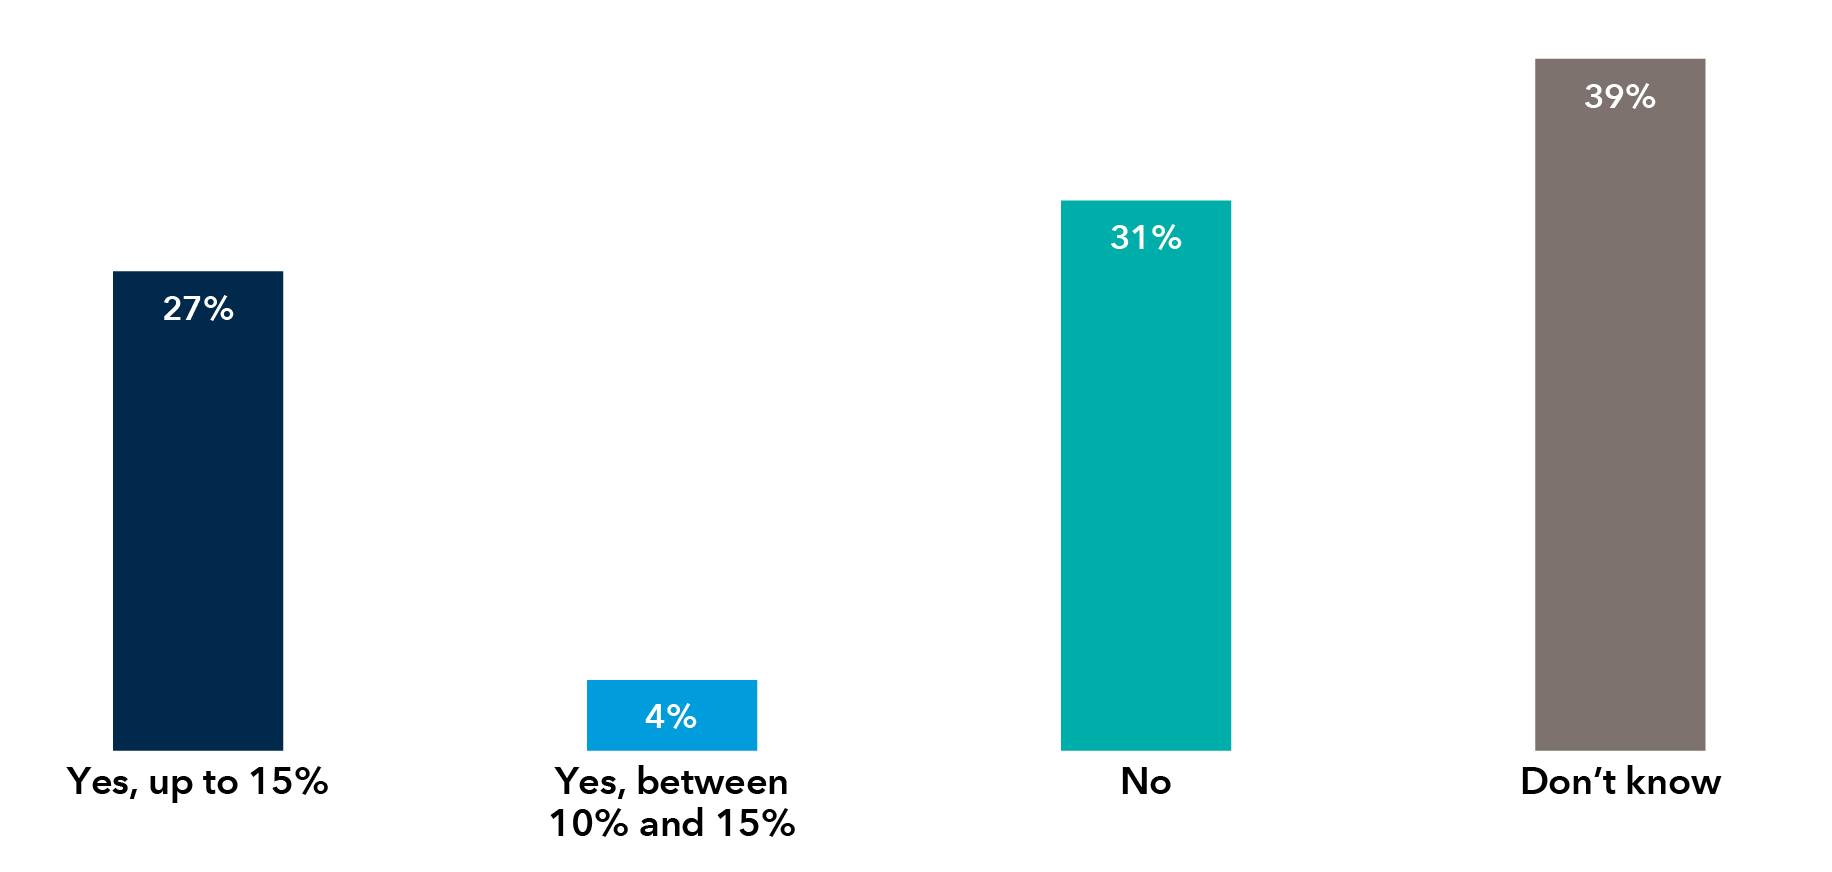 Bar graph showing that 27% of respondents answered, “Yes, up to 15%”; 4% answered, “Yes, between 10% and 15%”; 31% answered, “No”; and 39% answered, “Don’t know.”